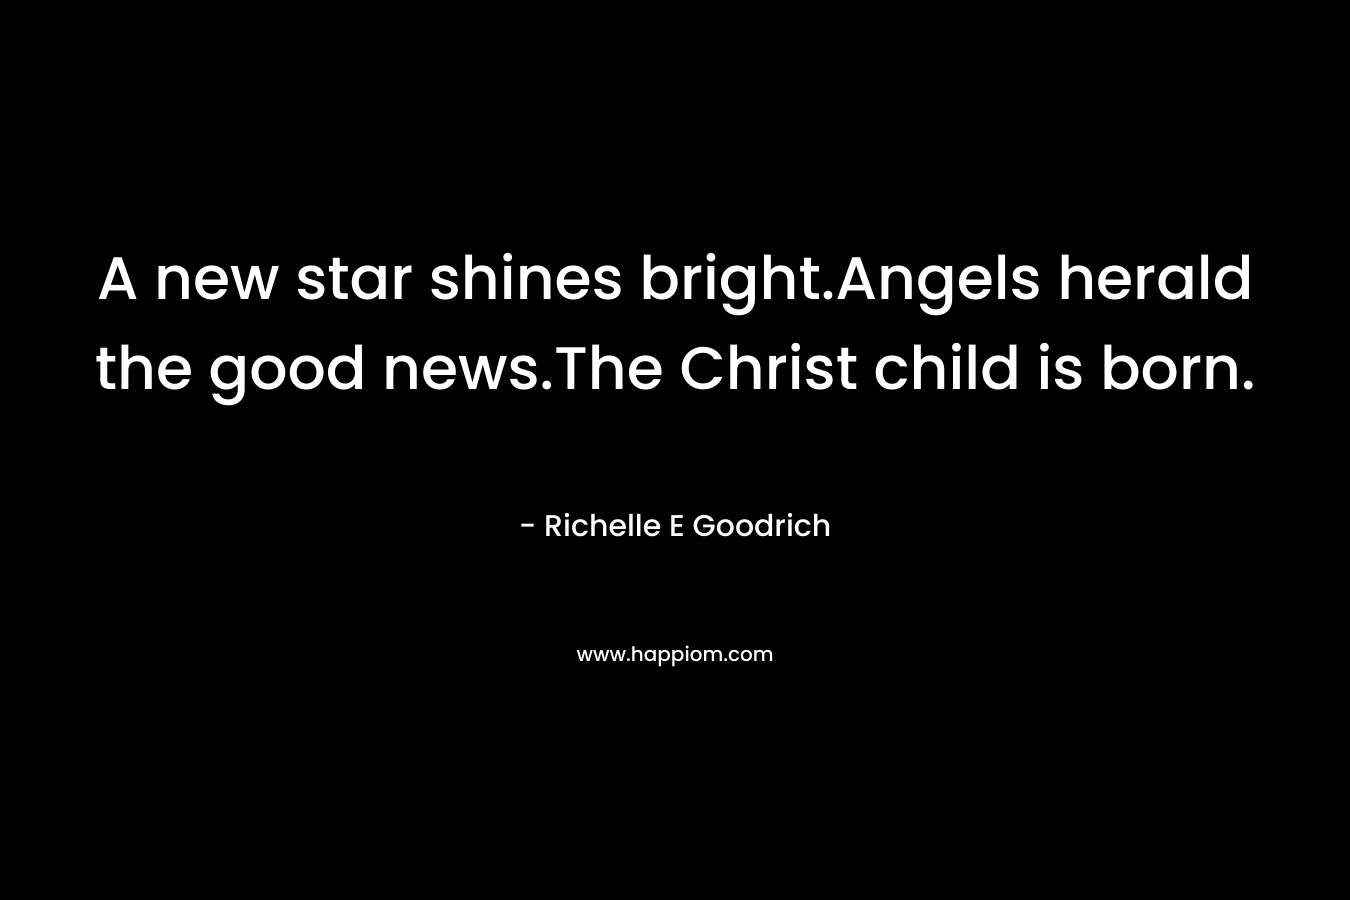 A new star shines bright.Angels herald the good news.The Christ child is born. – Richelle E Goodrich